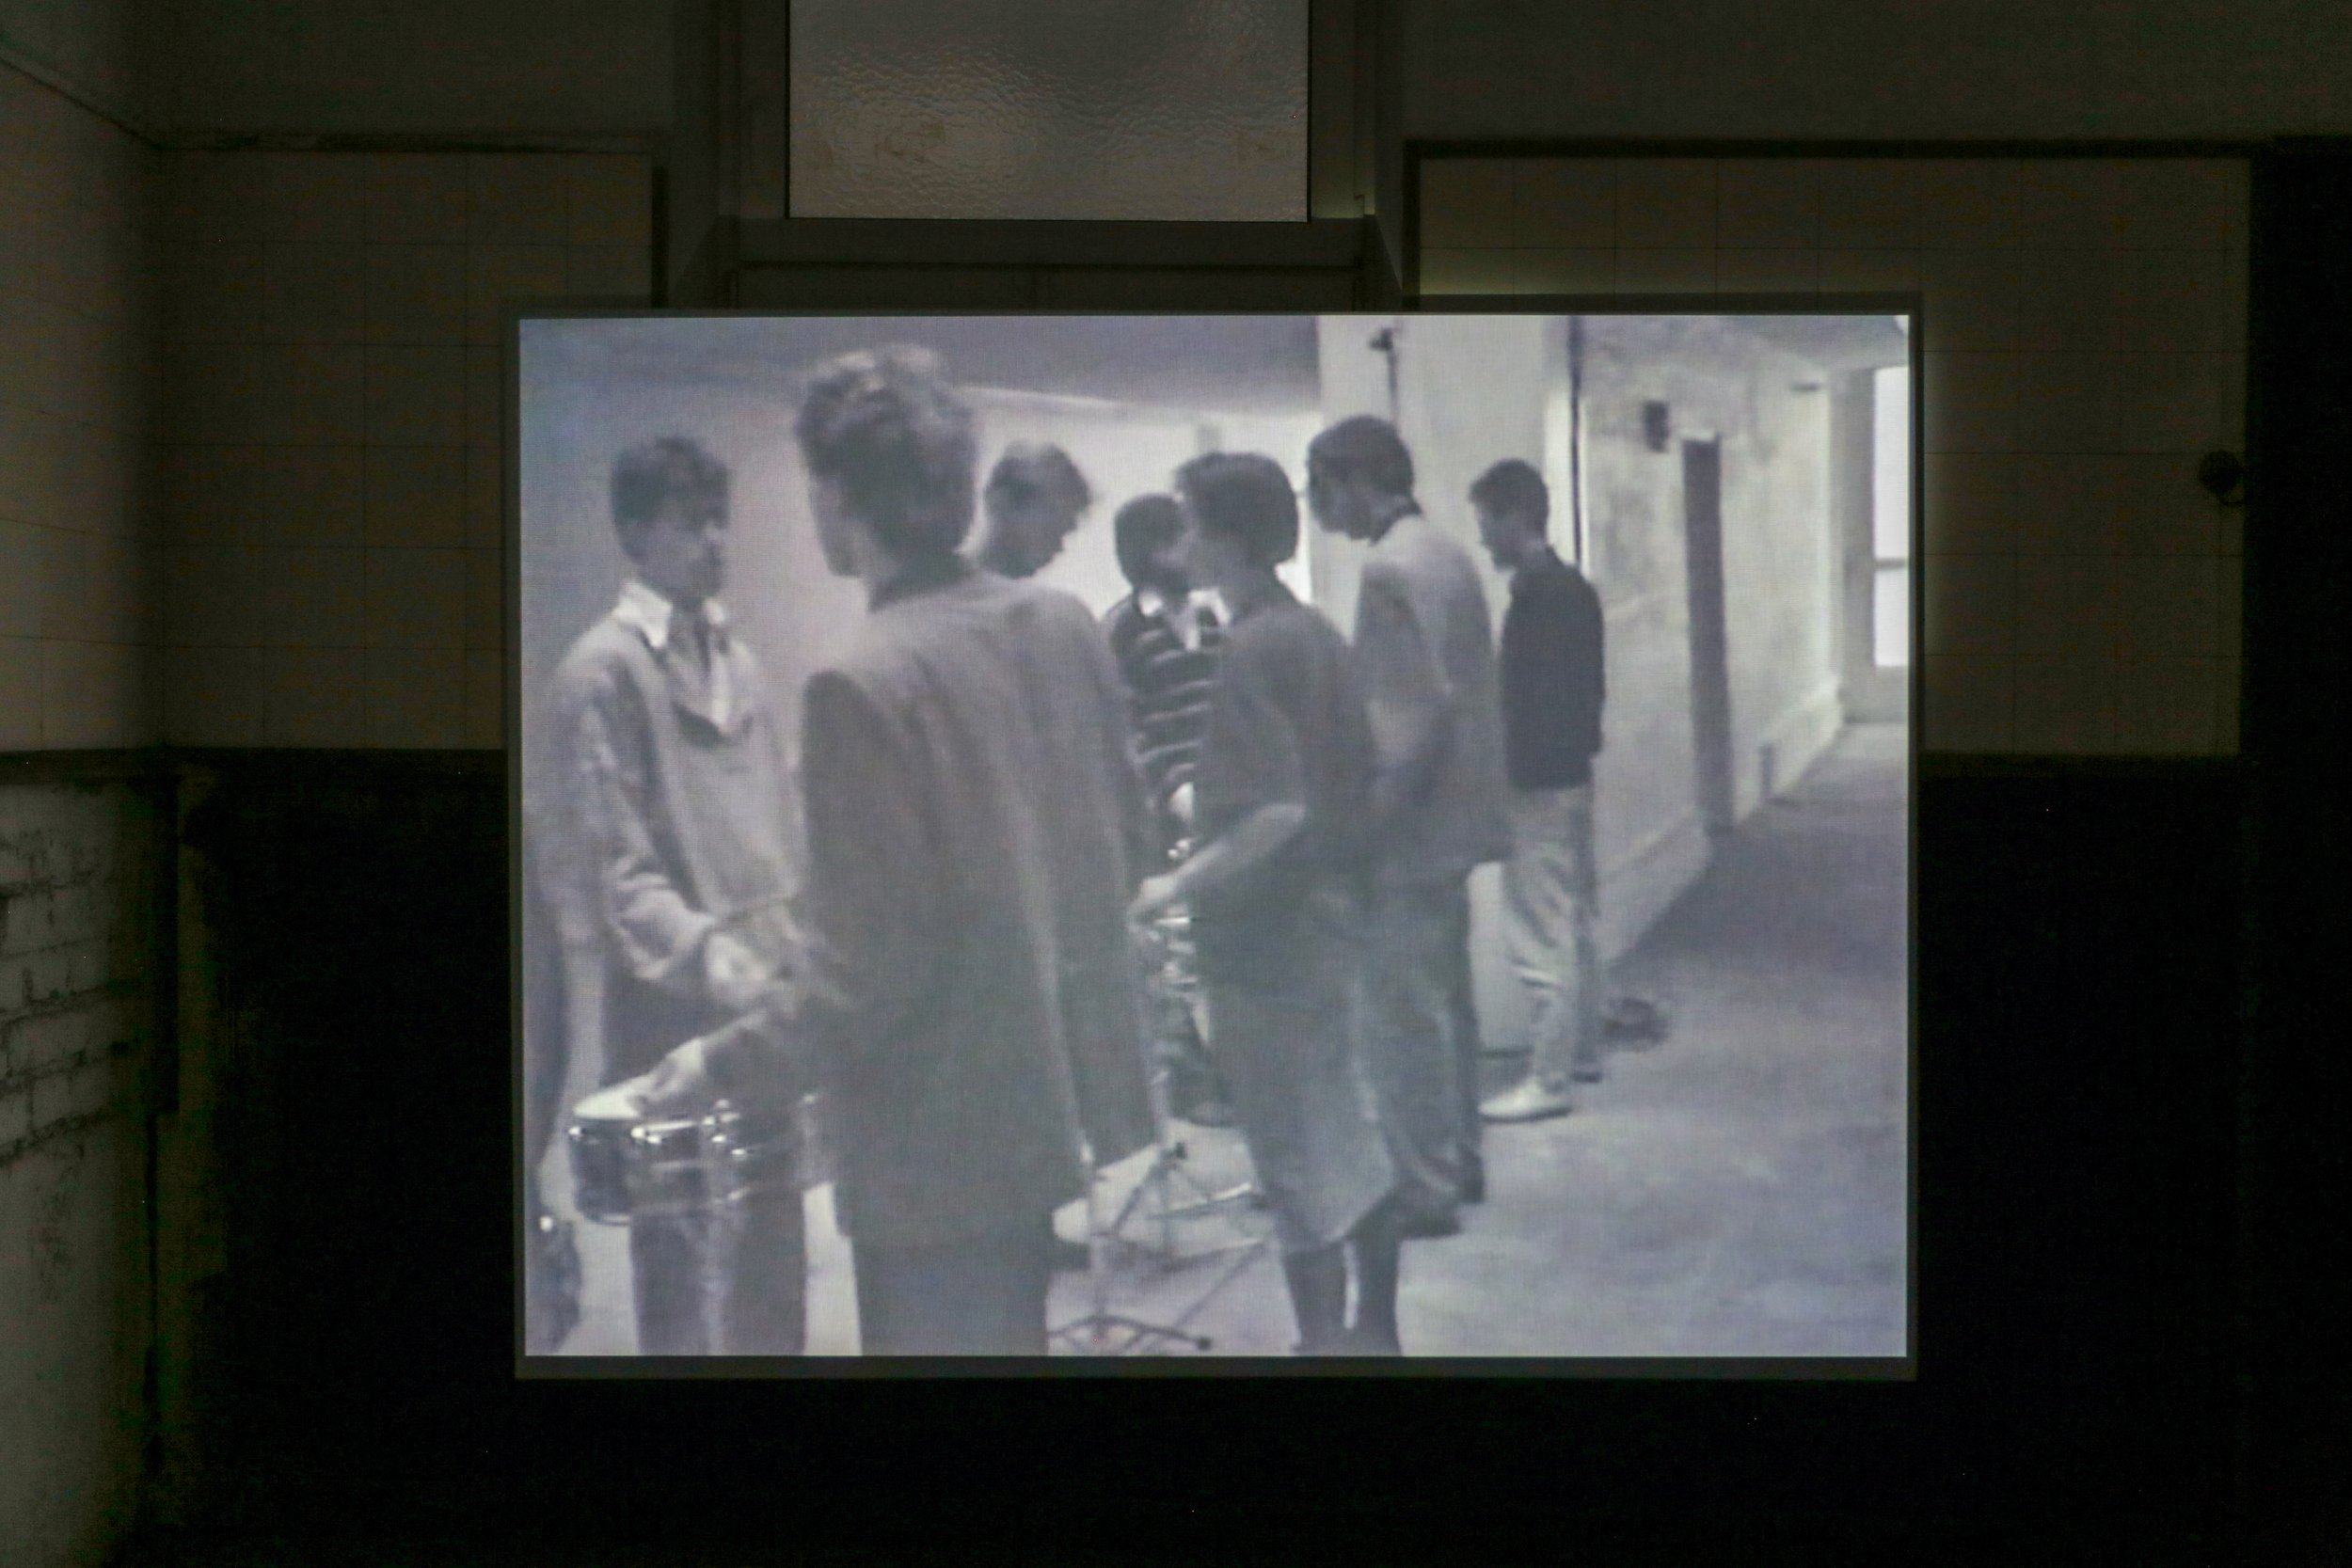   fig14 installation view Toine Horvers, Rolling, 1986 , 00:15:53., In collections: De Appel, LIMA  